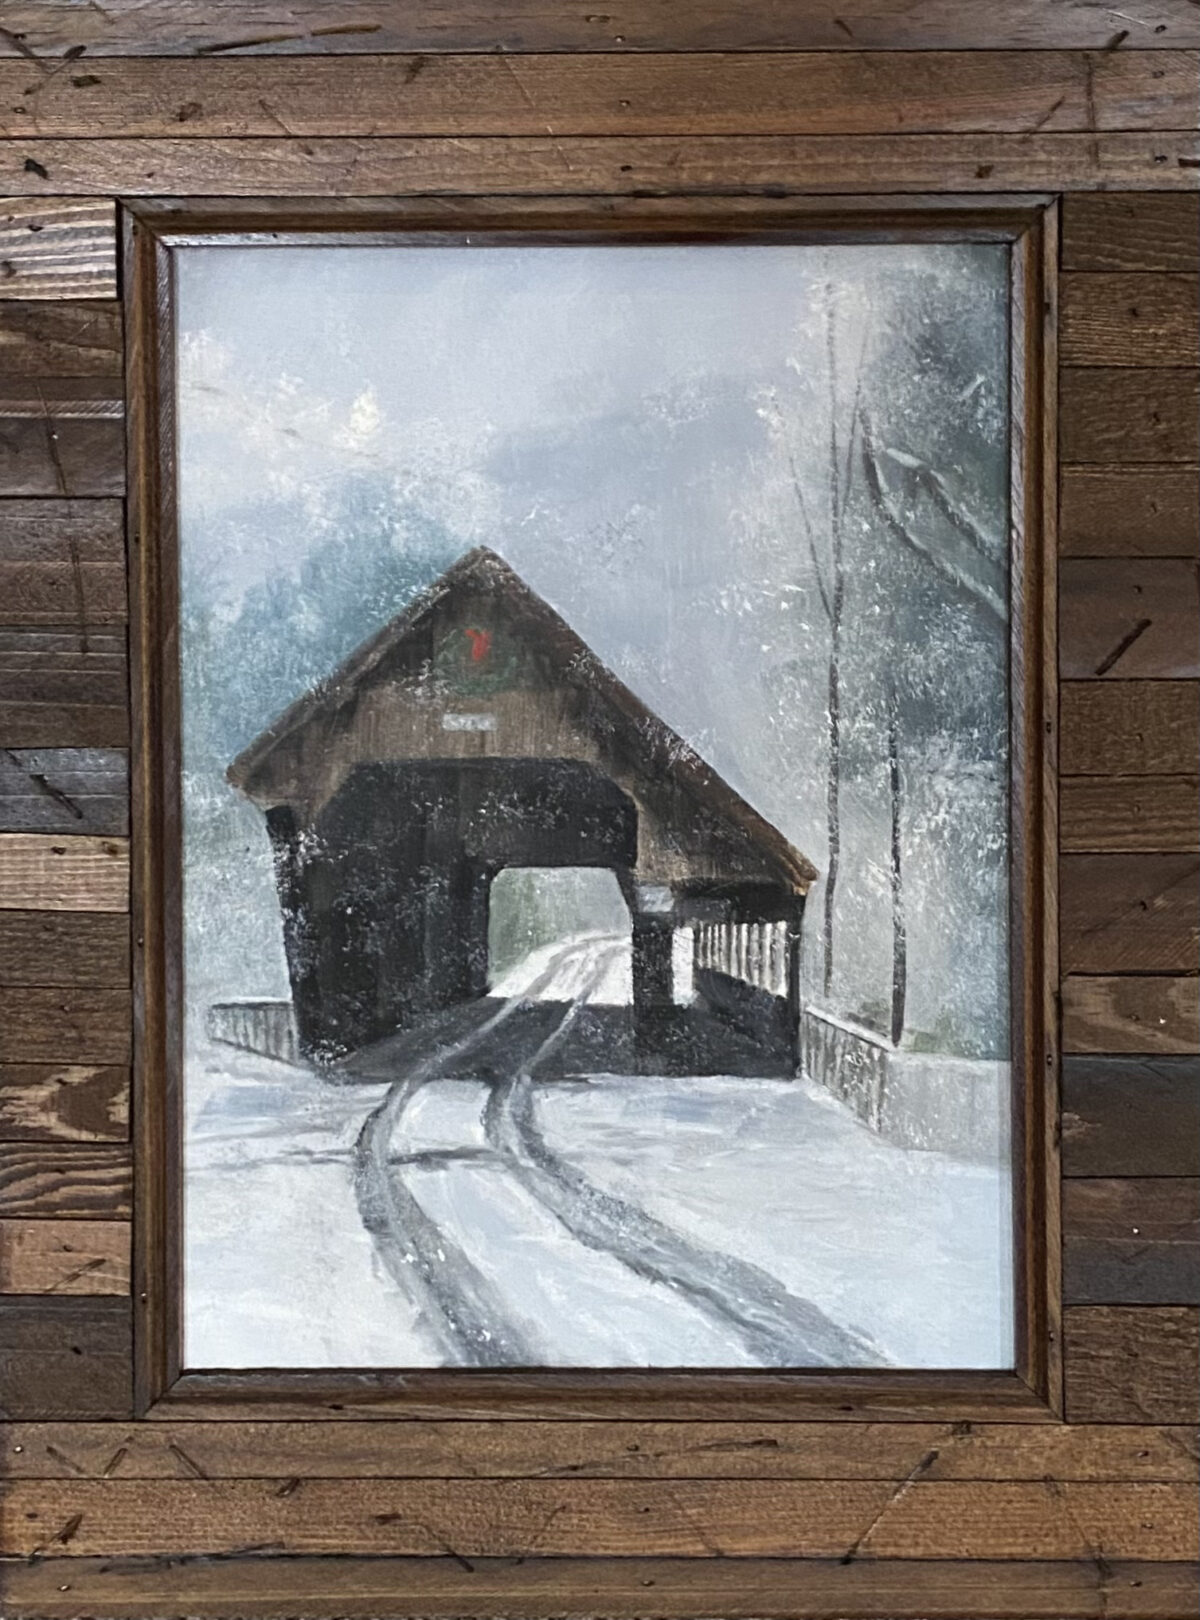 Henry Leck's painting depicts a snow-covered bridge in a winter landscape, with traces of footsteps on the snowy path.